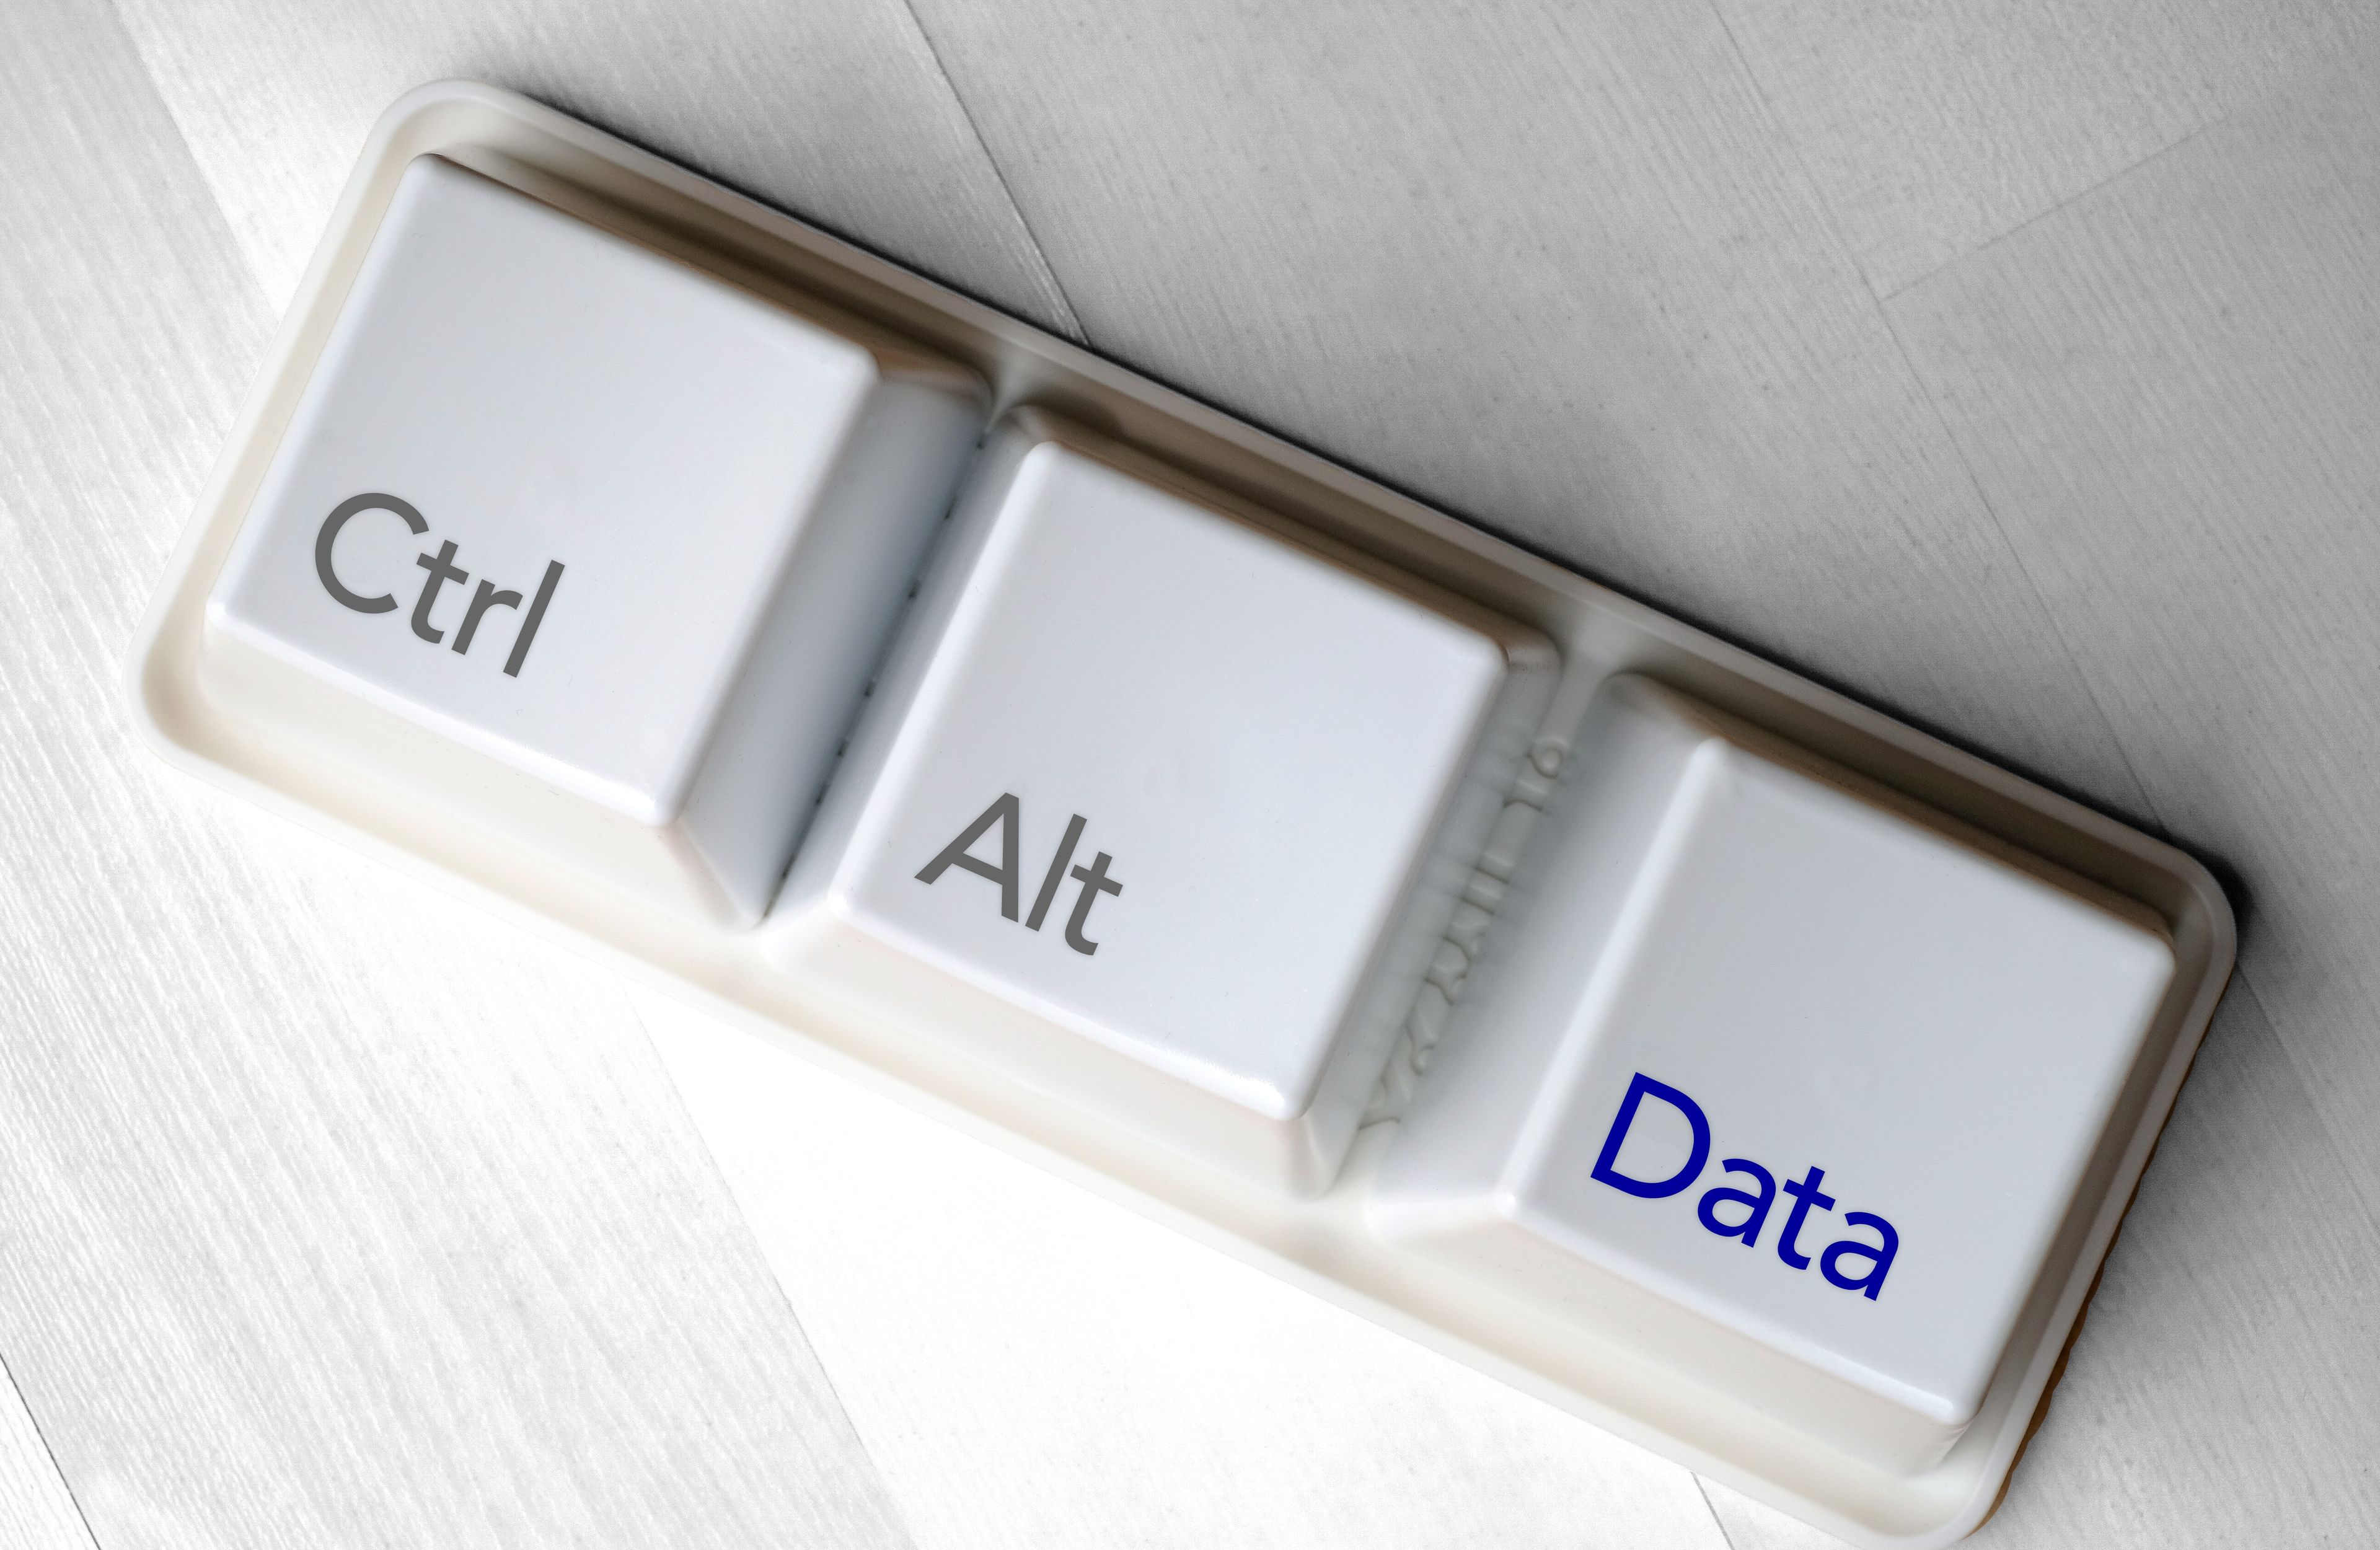 A photo of the 'Control' and 'Alt' keys from a keyboard, and a third key labelled 'Data'